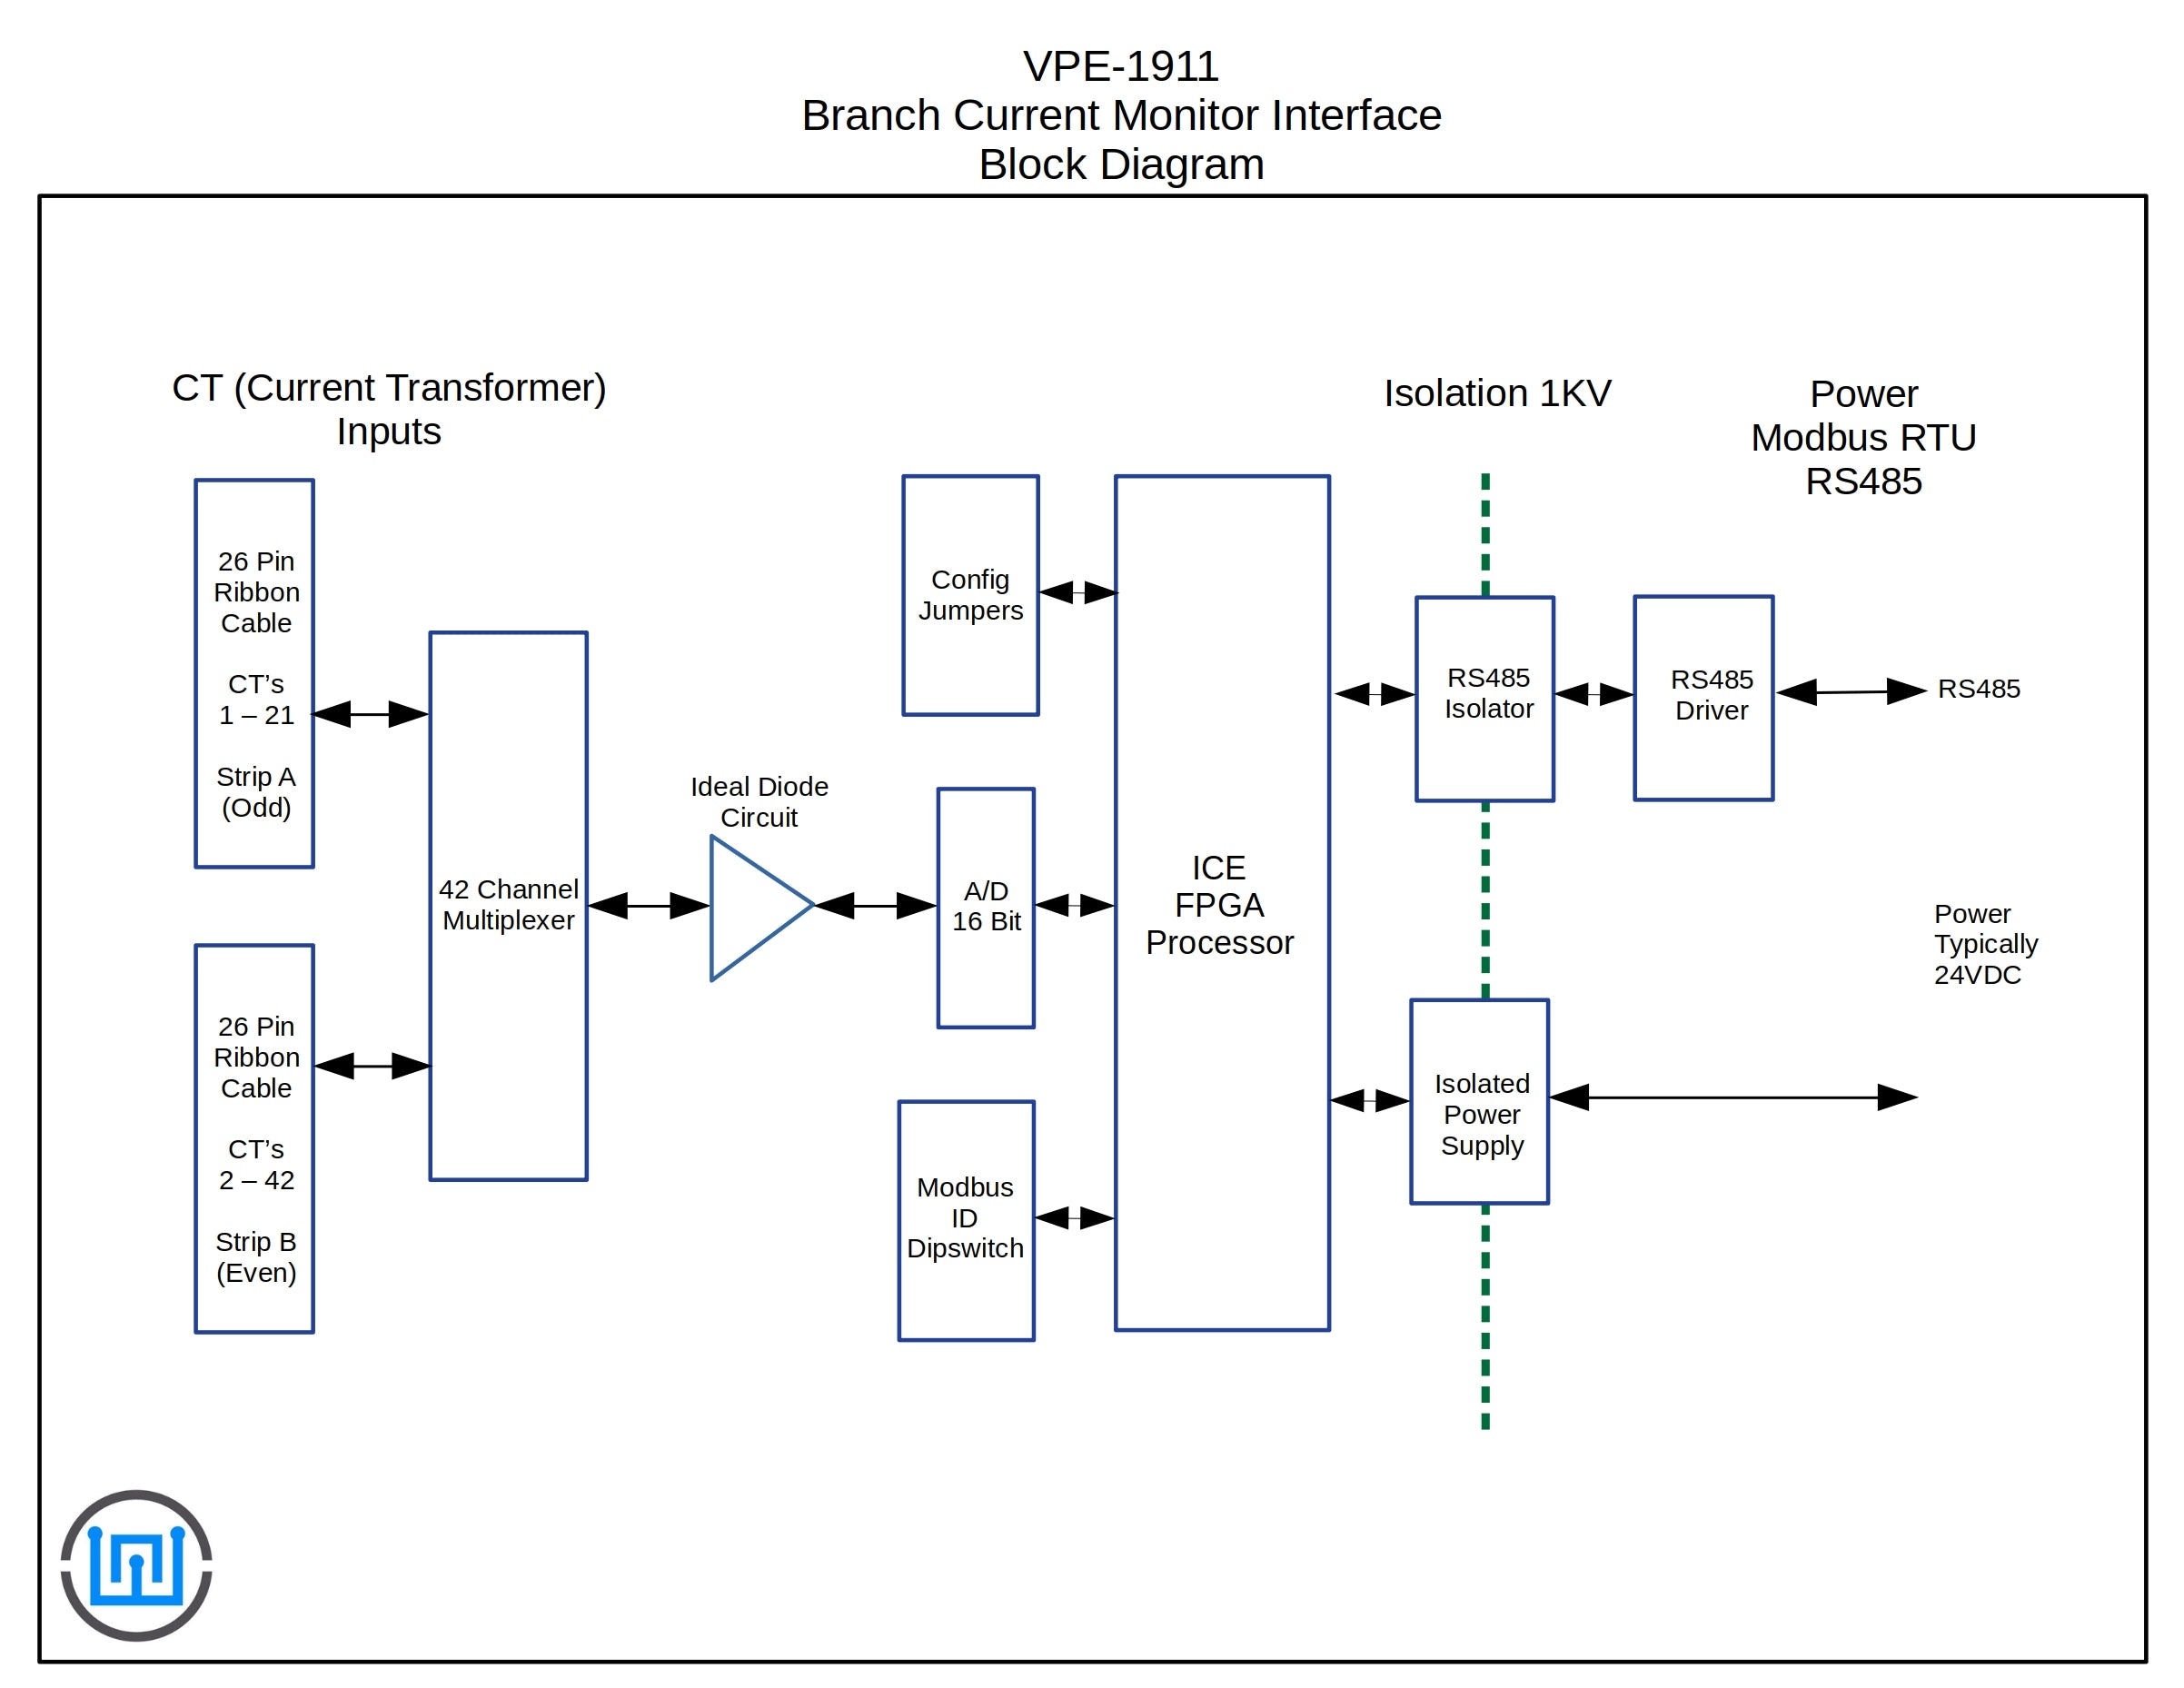 VPE-1911 Branch Current Monitor Block Diagram